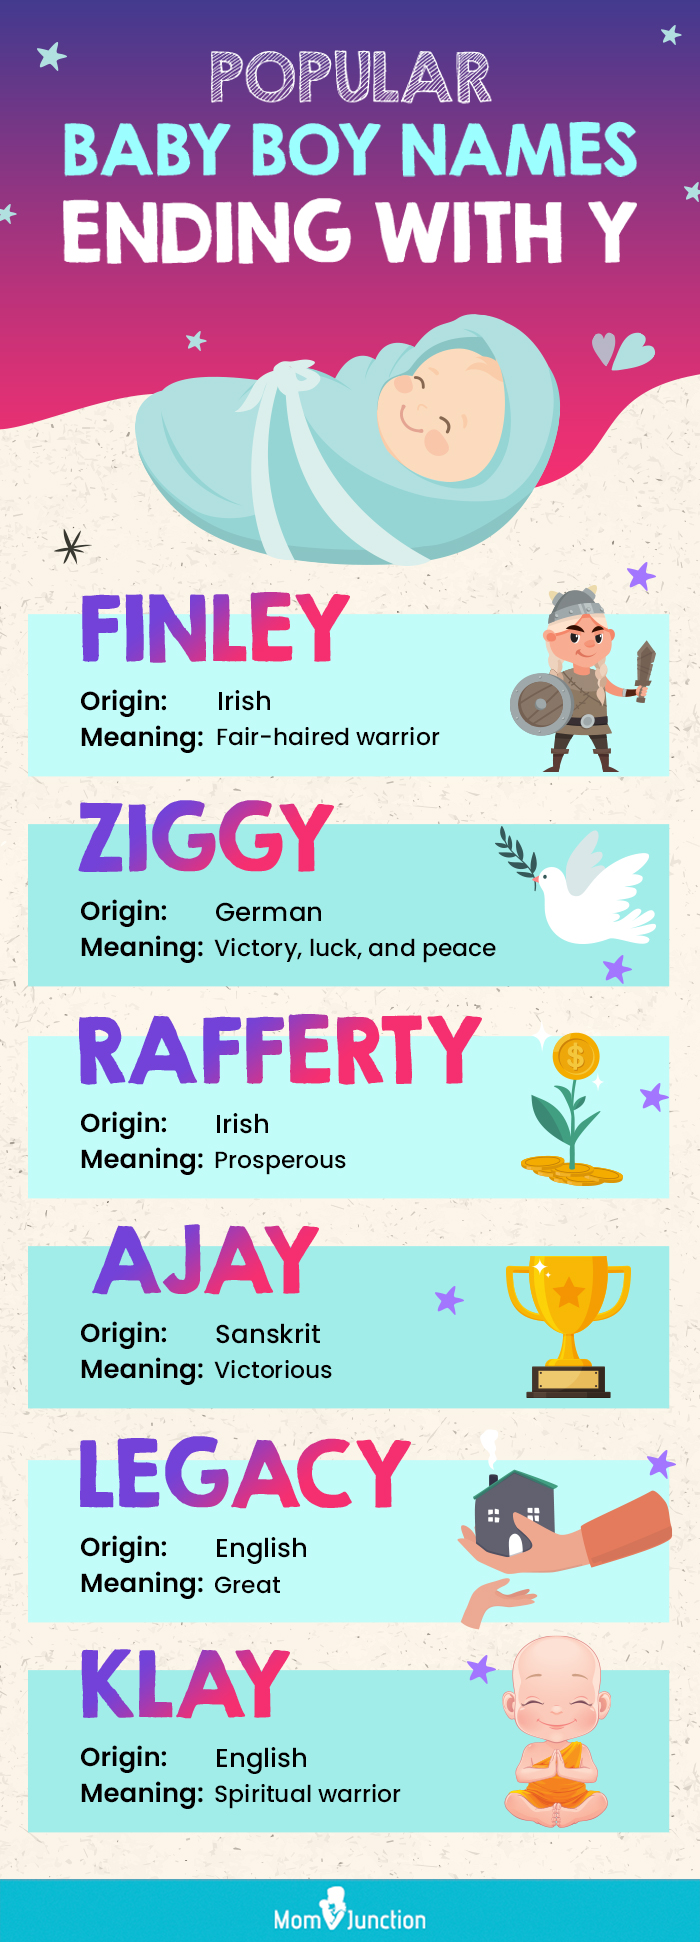 baby boy names ending with y [infographic]